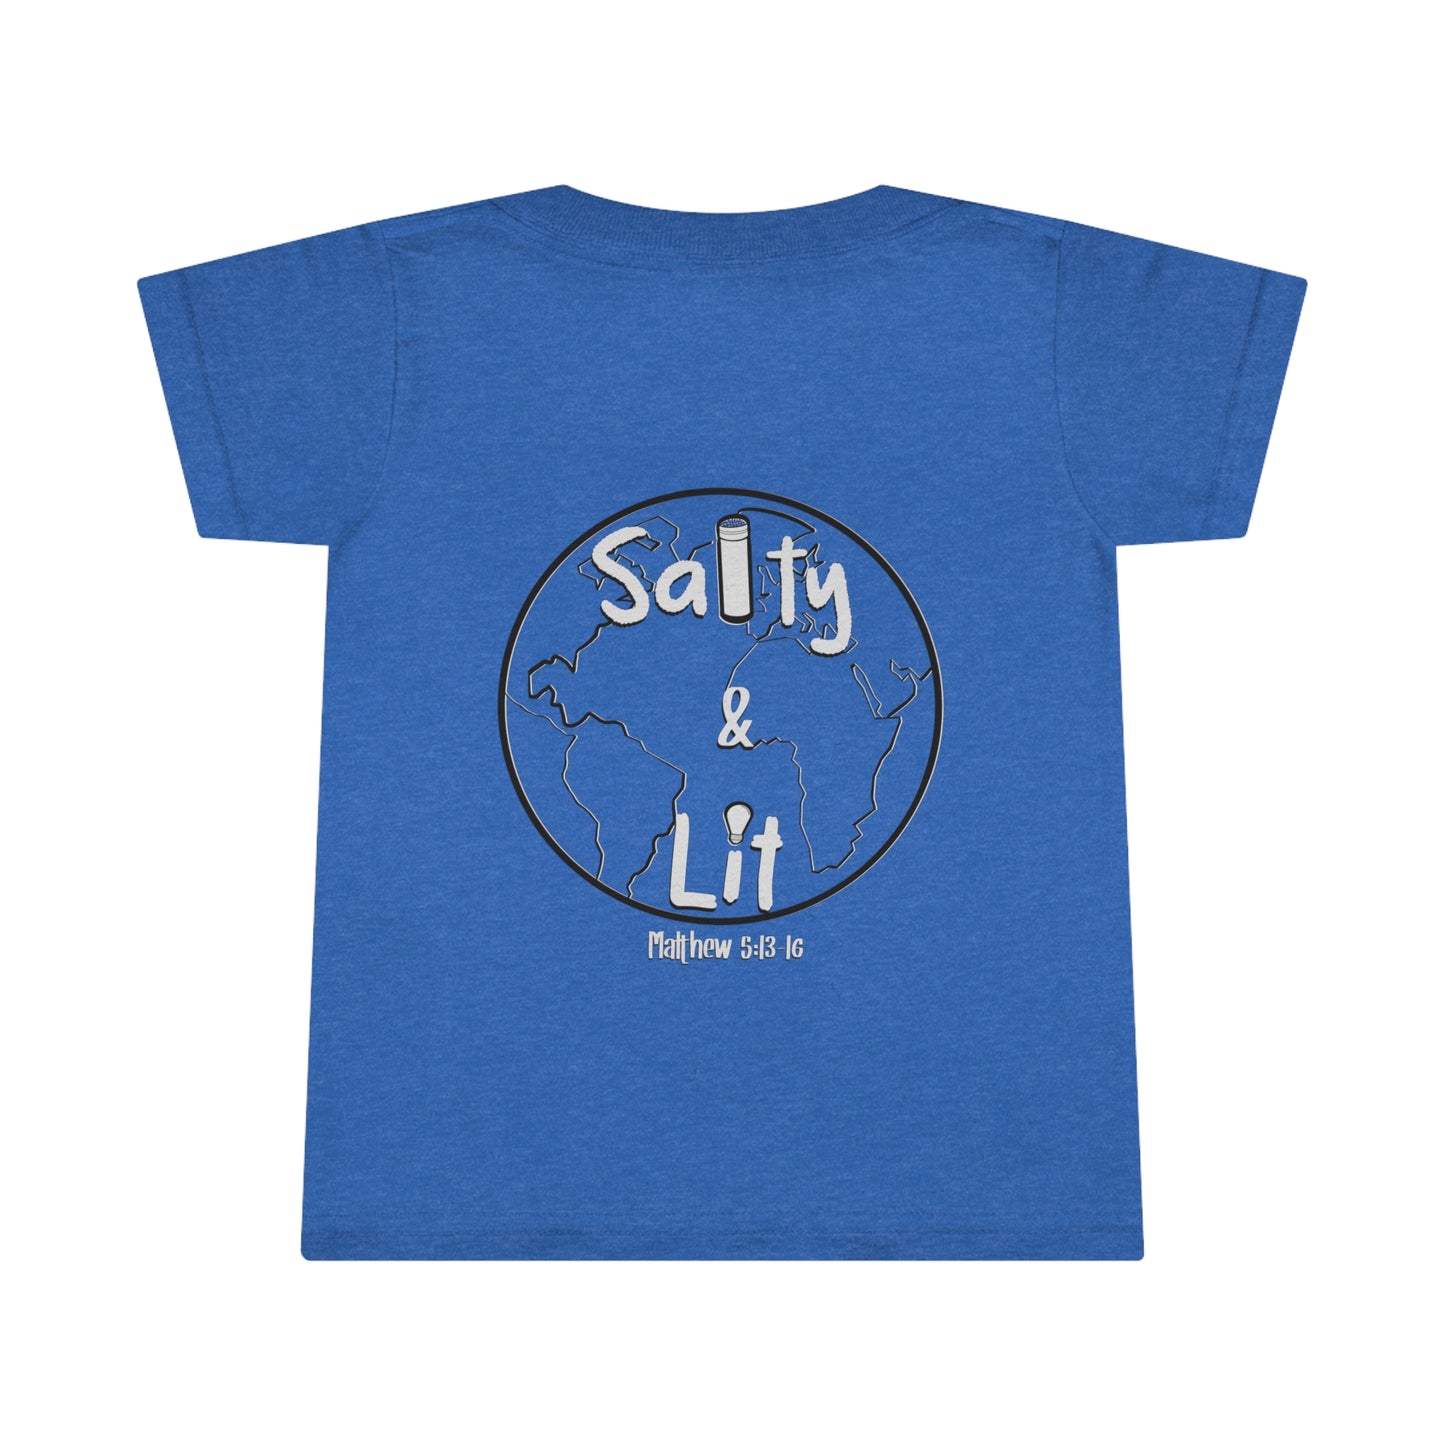 Salty & Lit- Toddlers Unisex (Available in more colors)